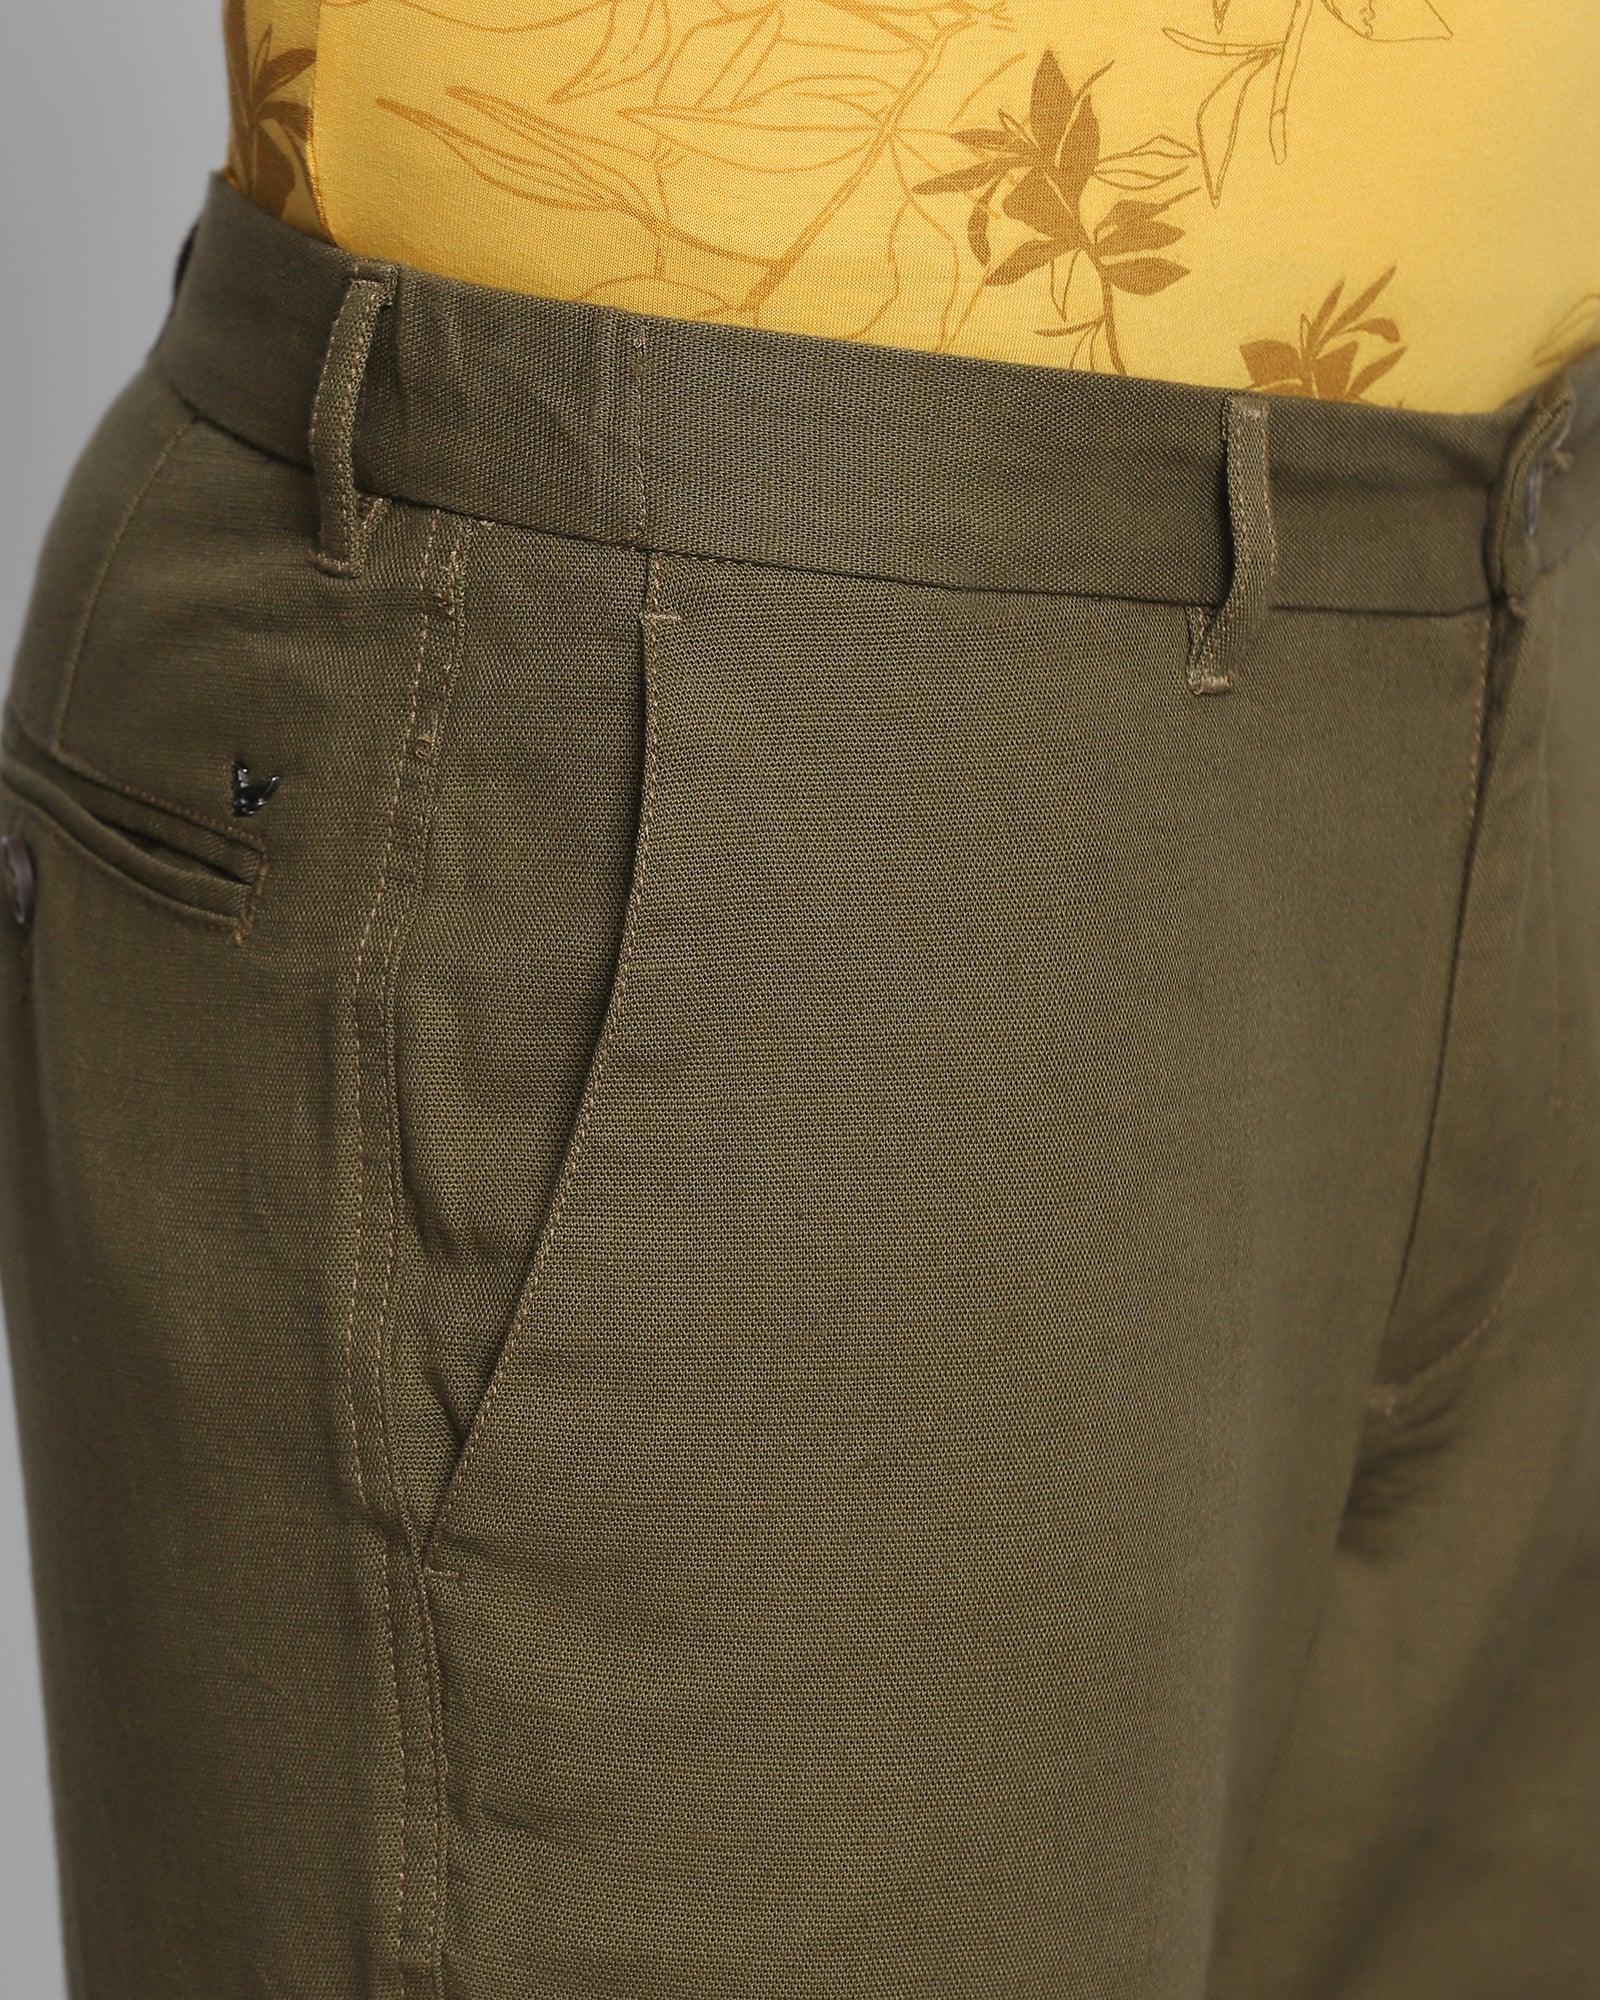 Casual Olive Solid Shorts - Combus